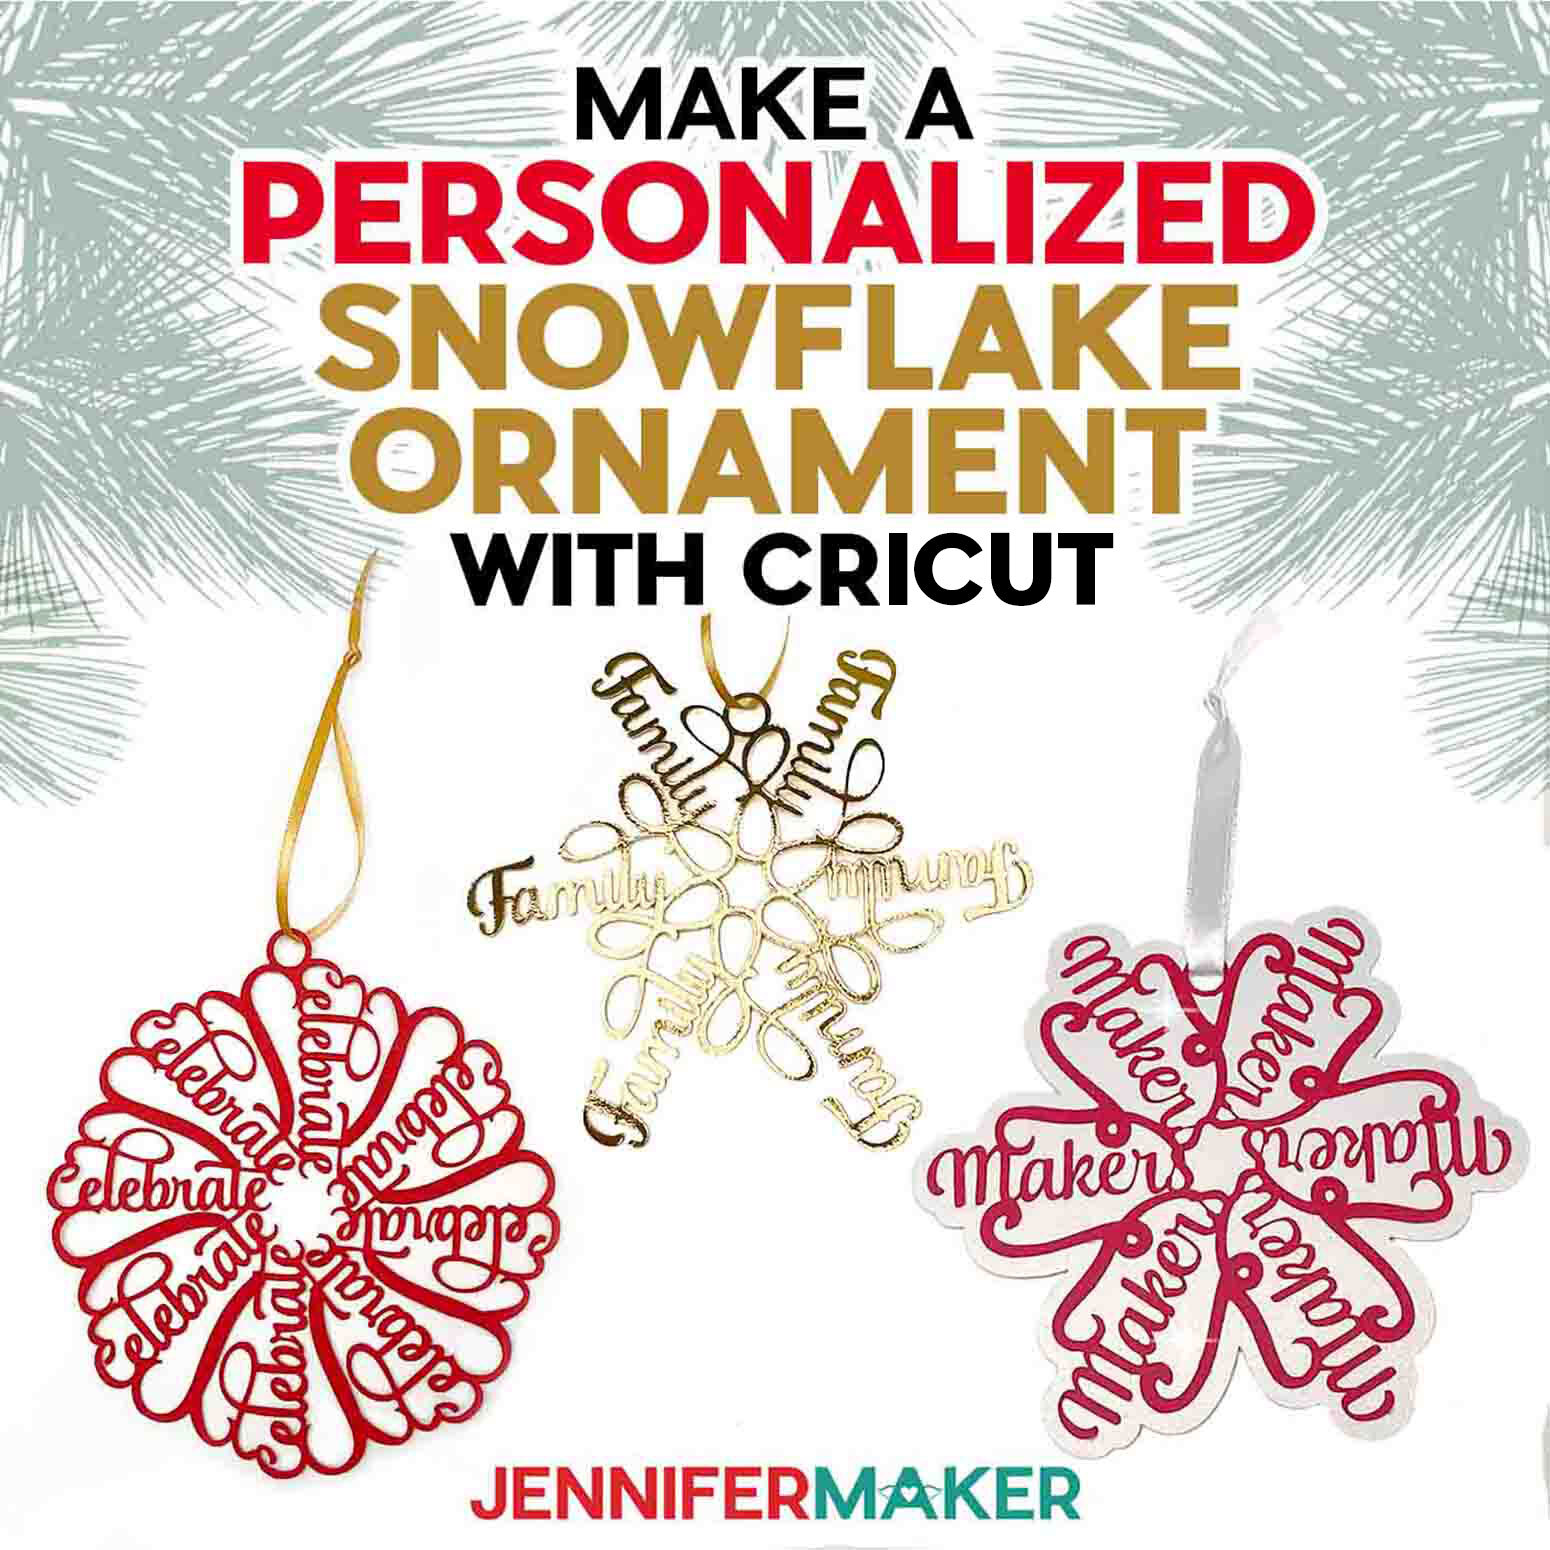 How To Make A Personalized Snowflake Ornament With Cricut